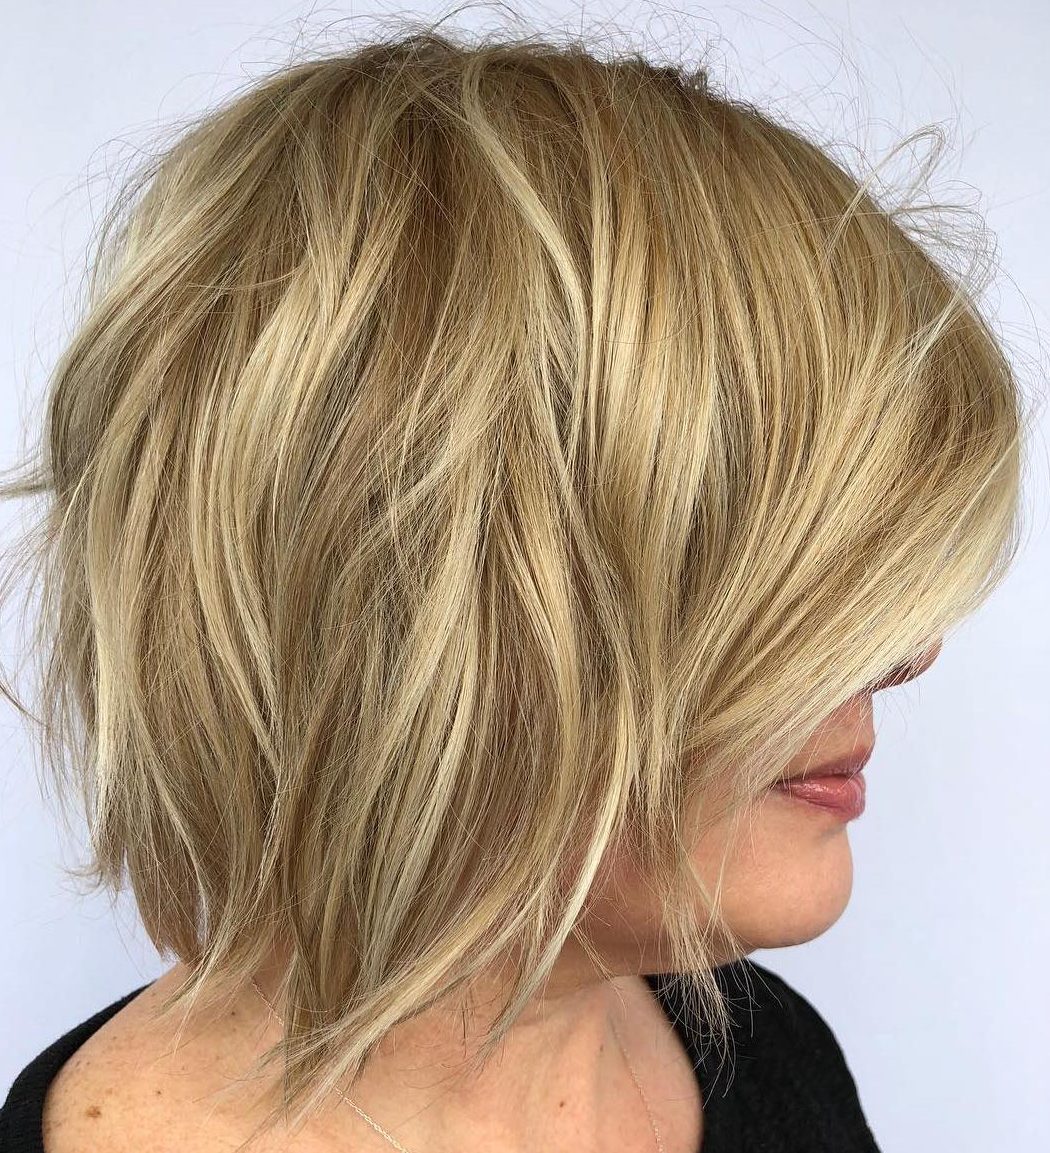 Medium layered bob hairstyles for over 50